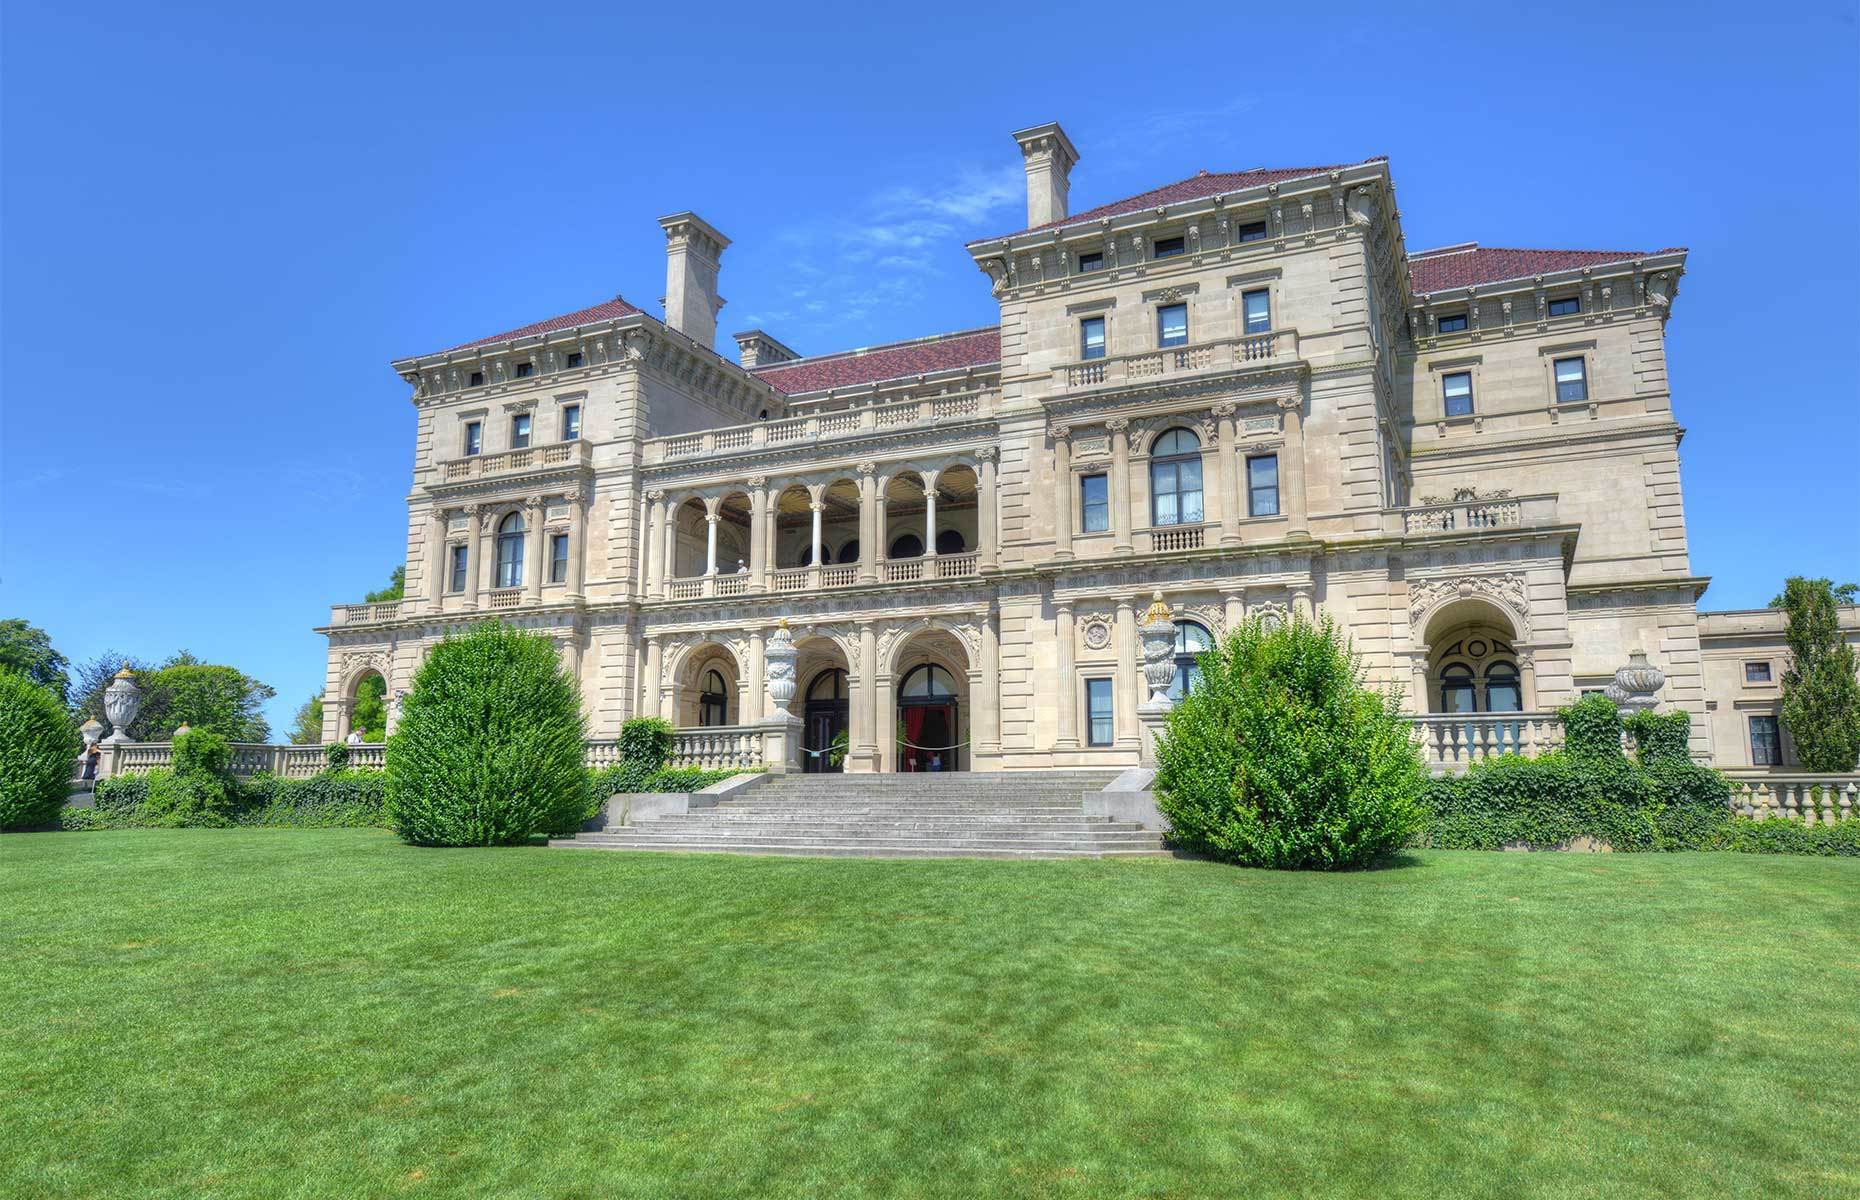 <p class="p1"><span>Impressive! Huge! Majestic! These are just some of the words you might hear when visiting the Breakers mansion or any of <a href="https://www.newportmansions.org/explore" rel="noreferrer noopener"><span>Newport’s other remarkable residences</span></a>. Get ready for one high-class tour.</span></p>